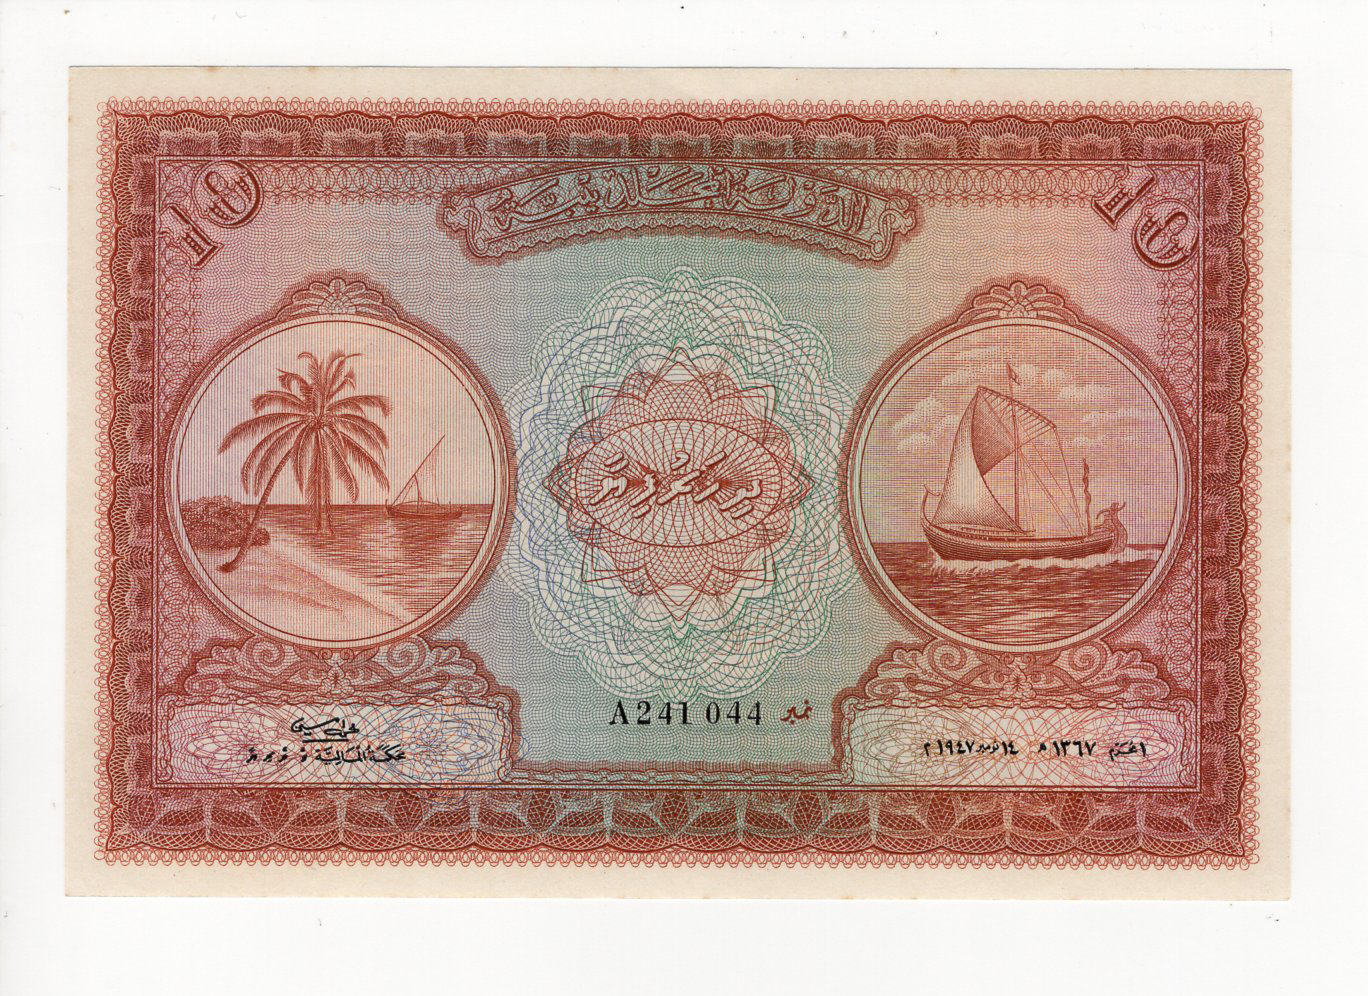 Maldives 10 Rupees dated 1947, serial A241 044 (TBB B105a, Pick5a) light toning, Uncirculated